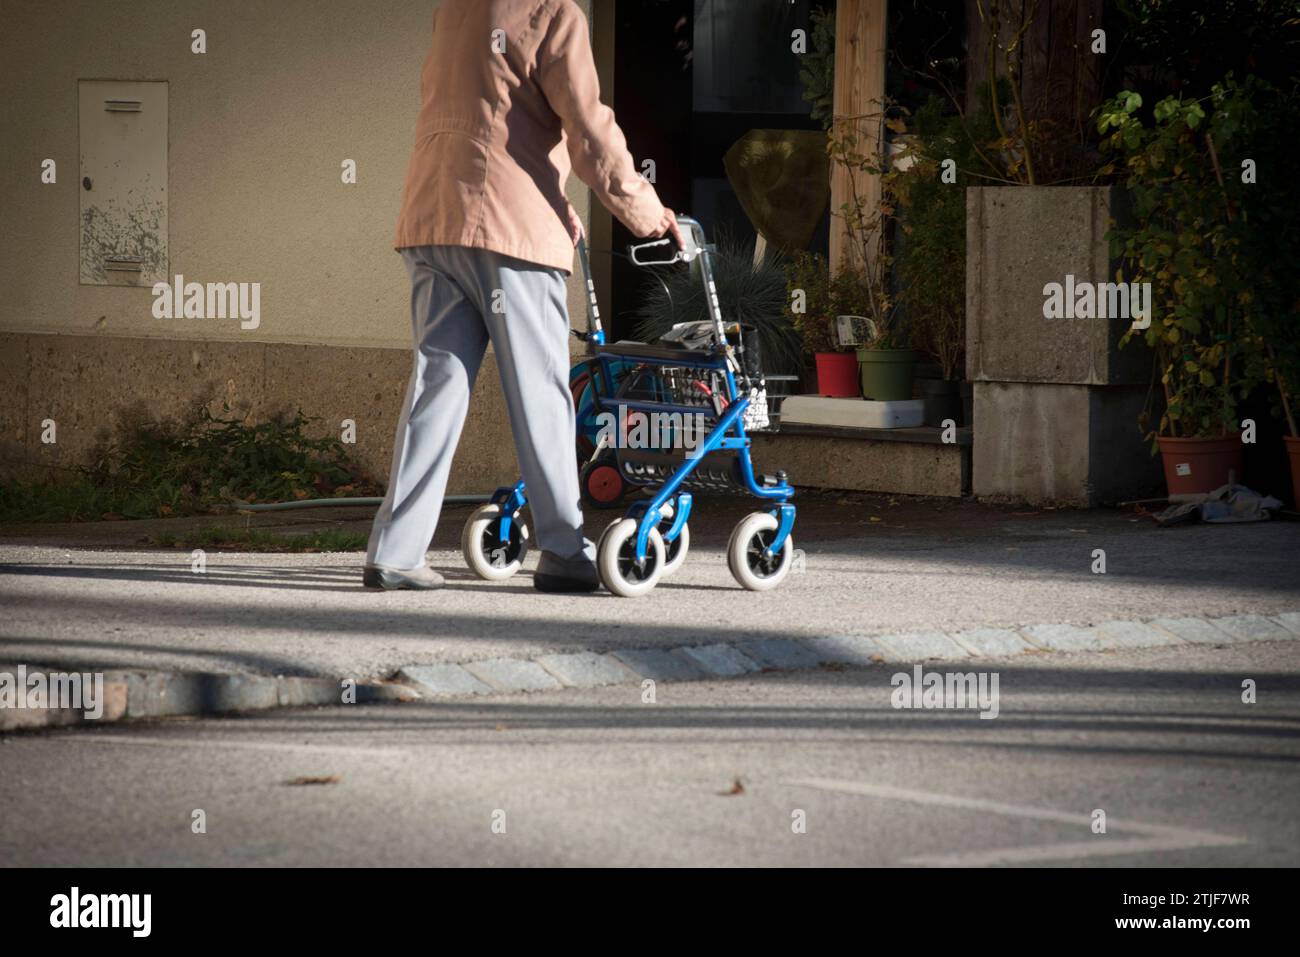 mobility of older people and senior citizens in everyday life mobility of older people in everyday life Stock Photo